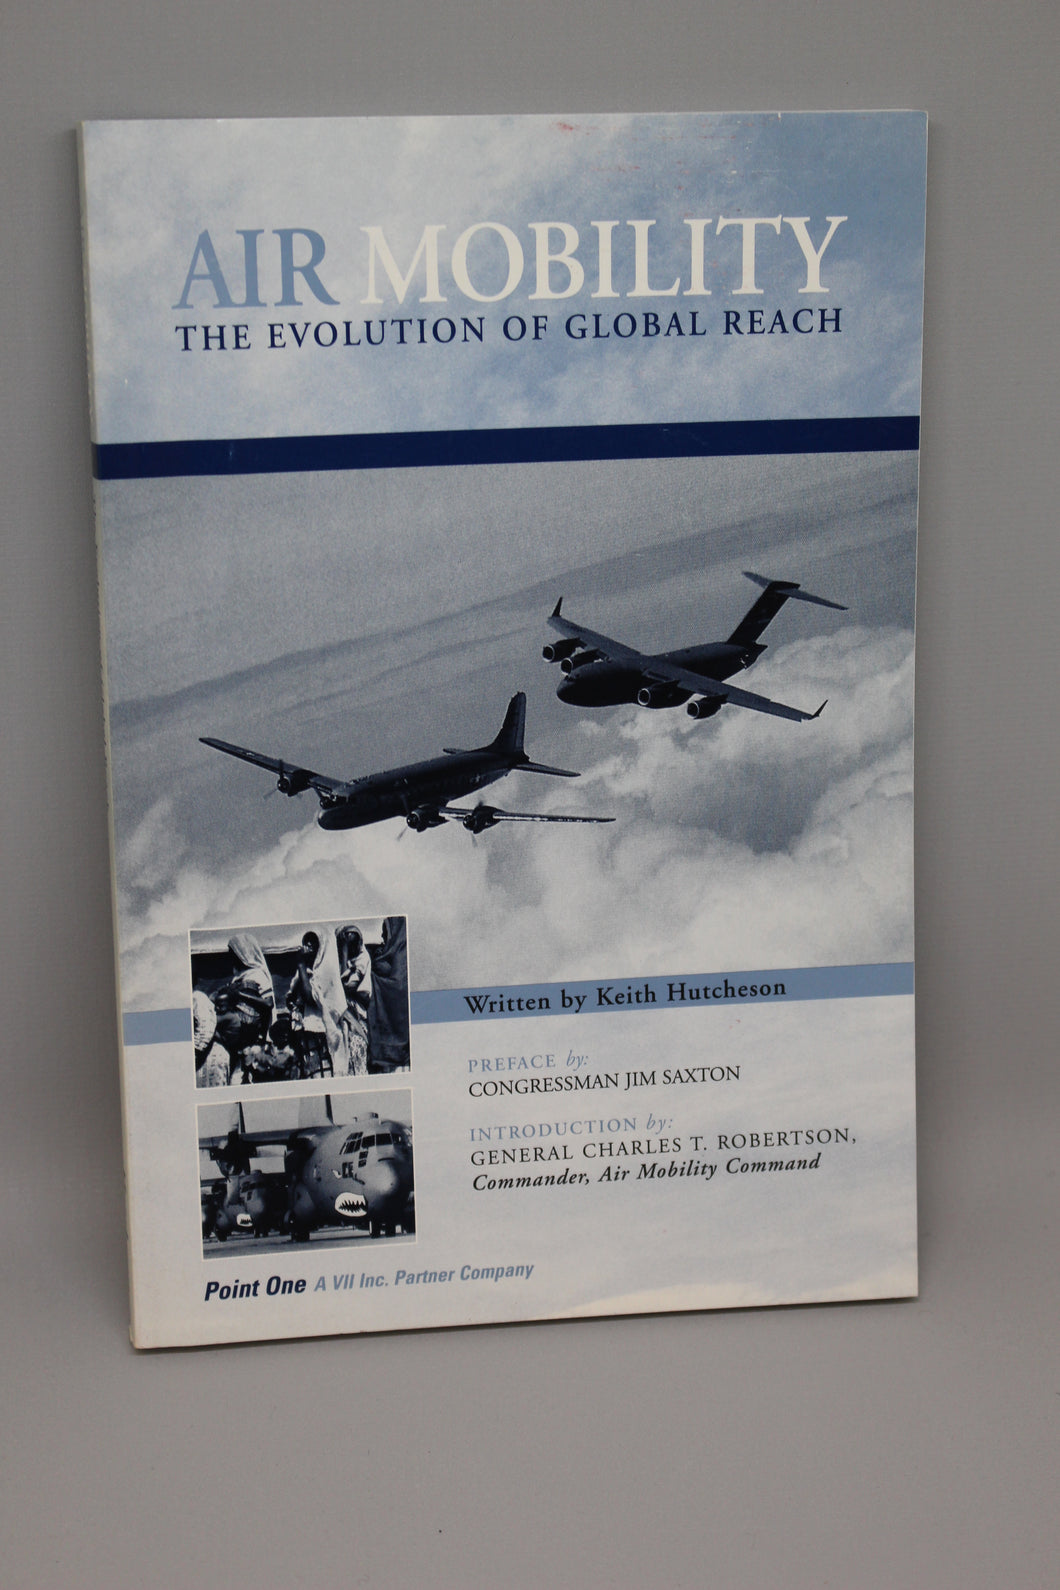 Air Mobility: The Evolution of Global Reach